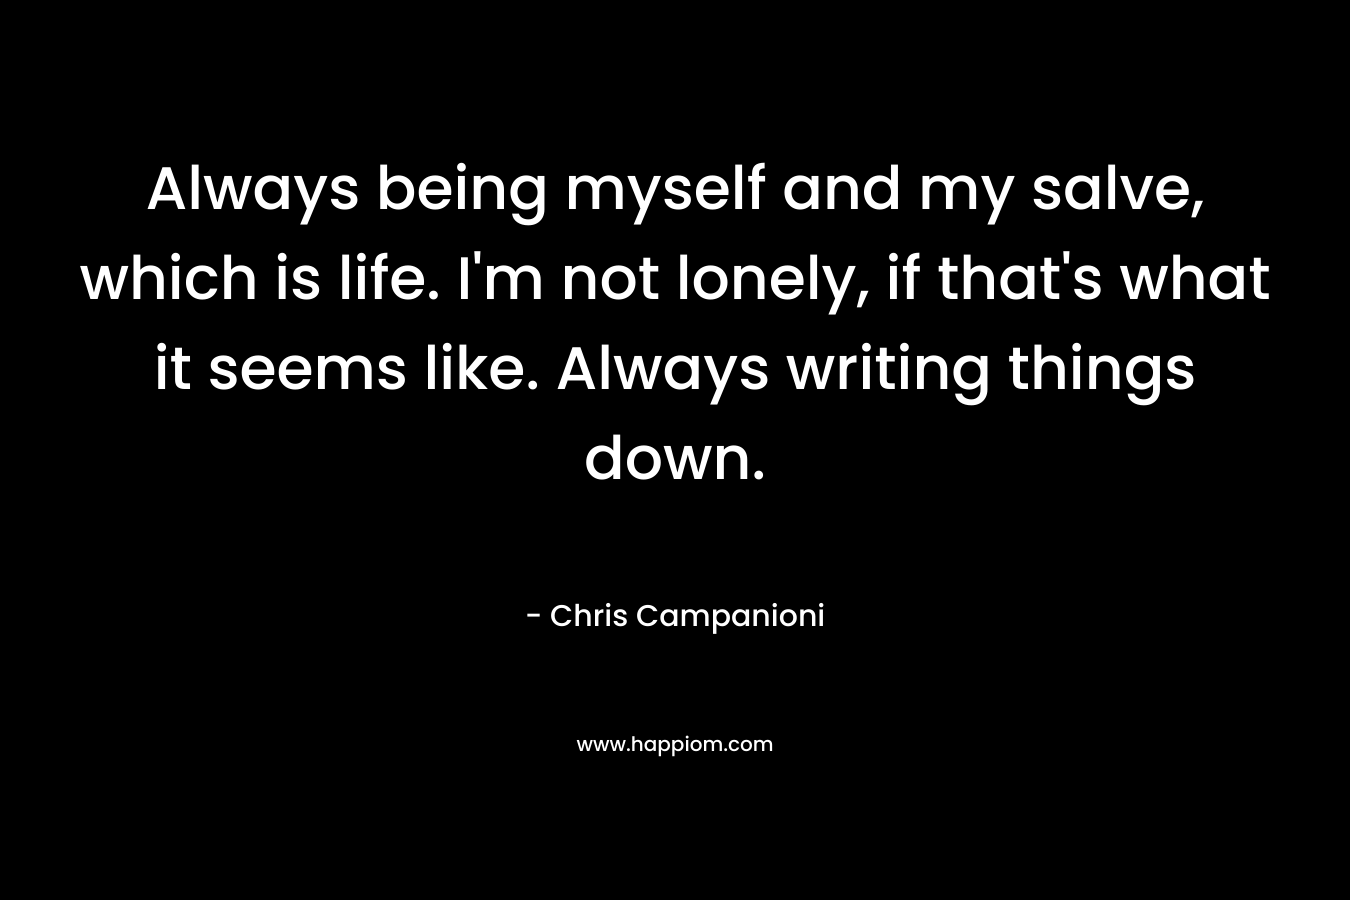 Always being myself and my salve, which is life. I’m not lonely, if that’s what it seems like. Always writing things down. – Chris Campanioni